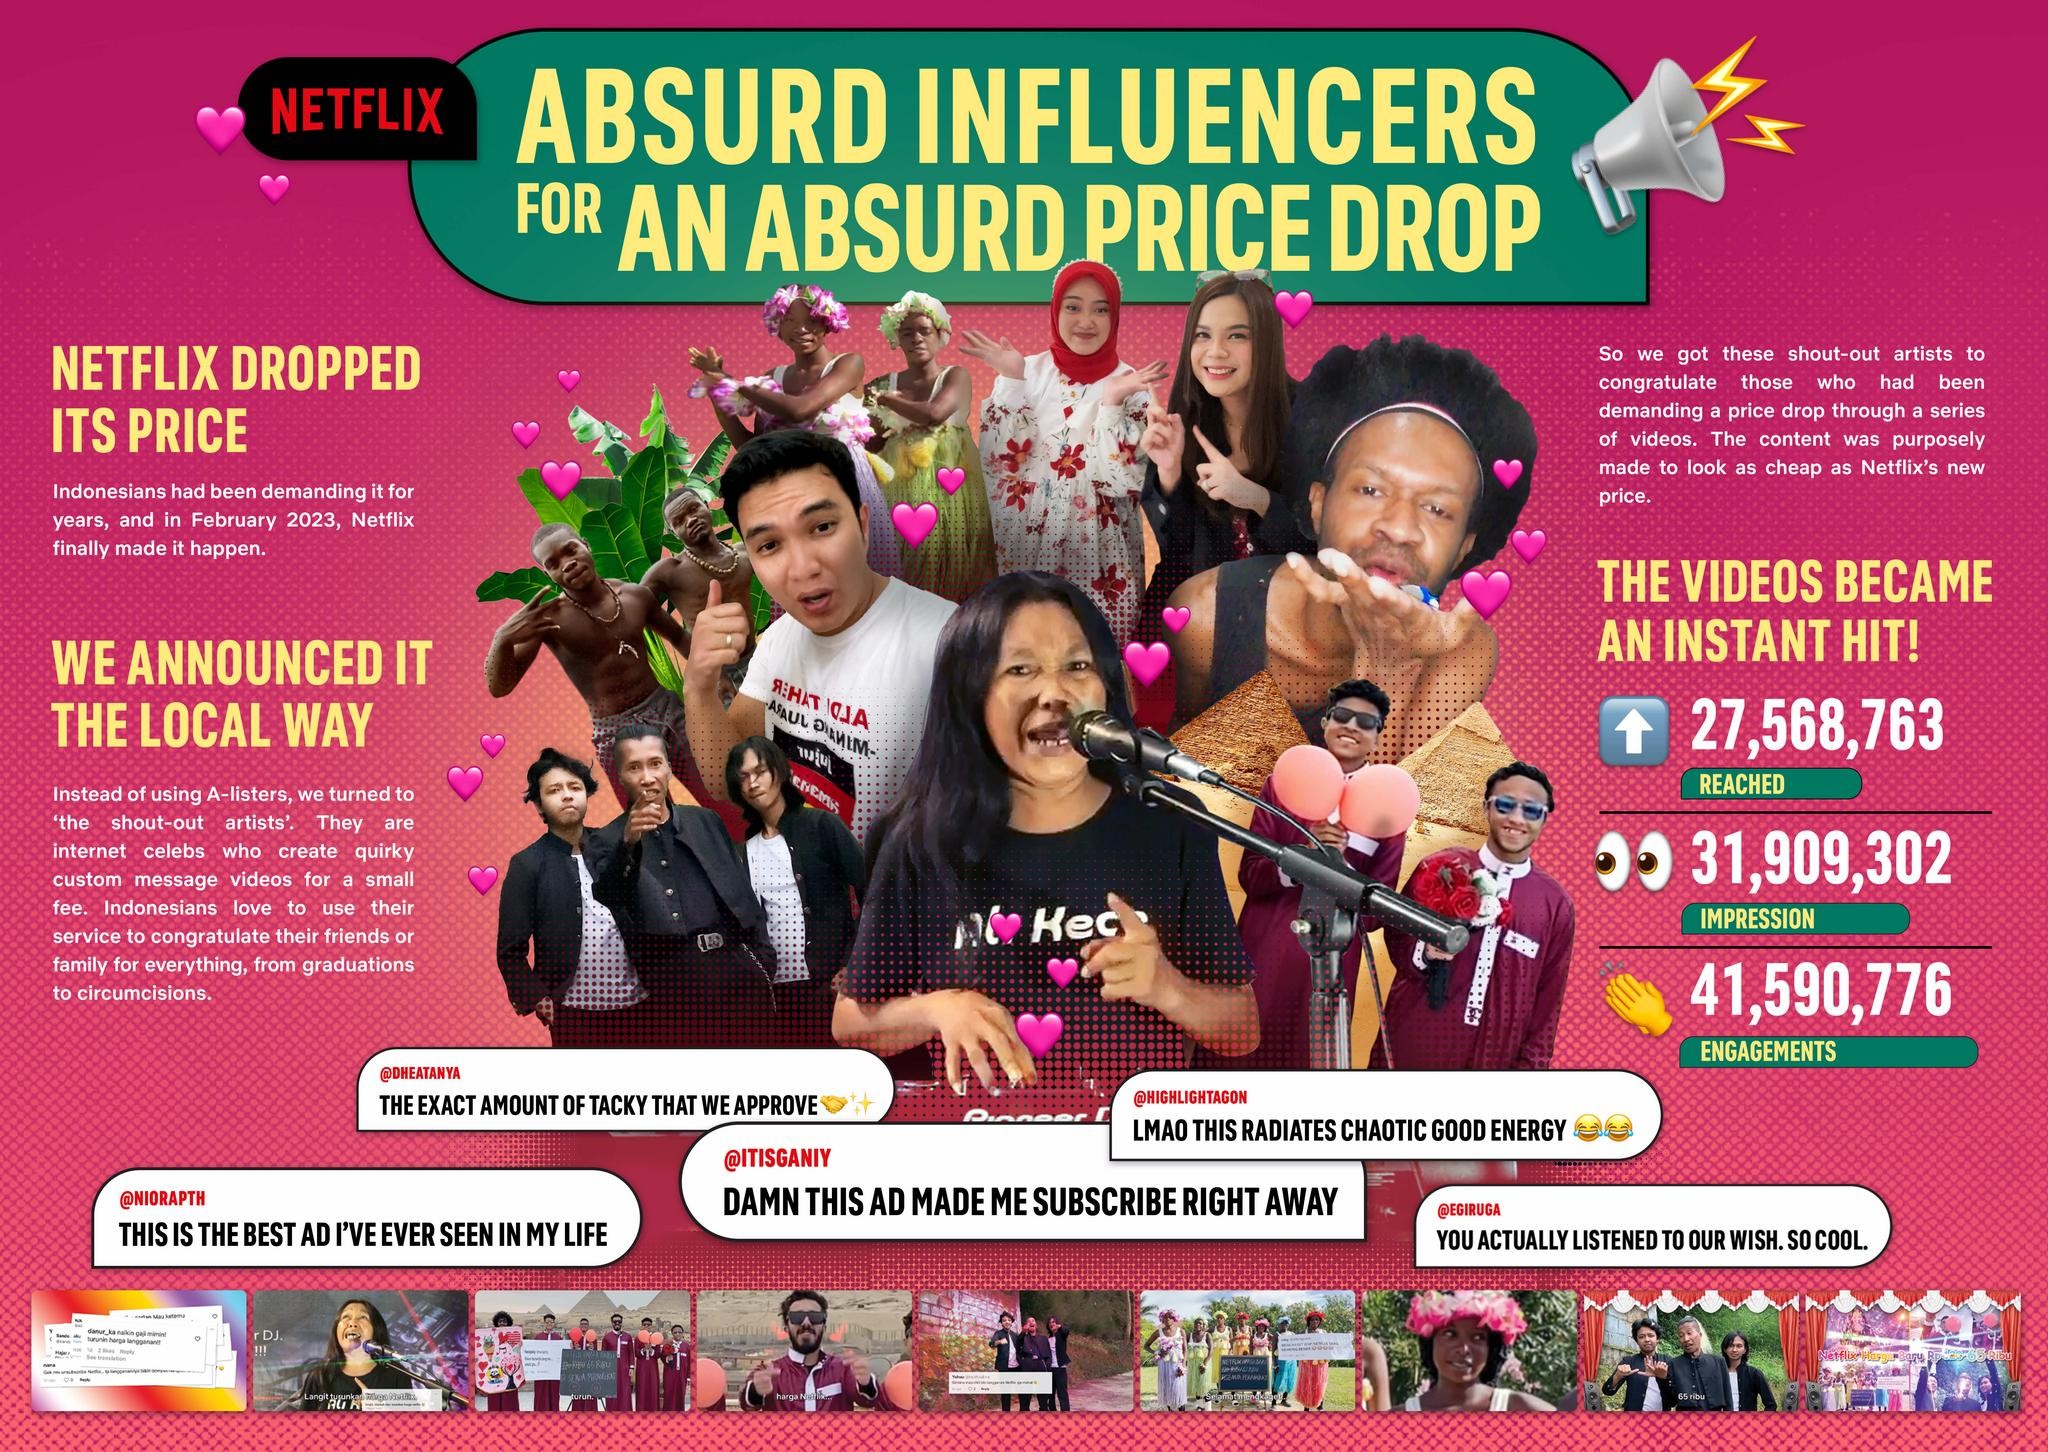 The Absurd Price Drop's Influencers